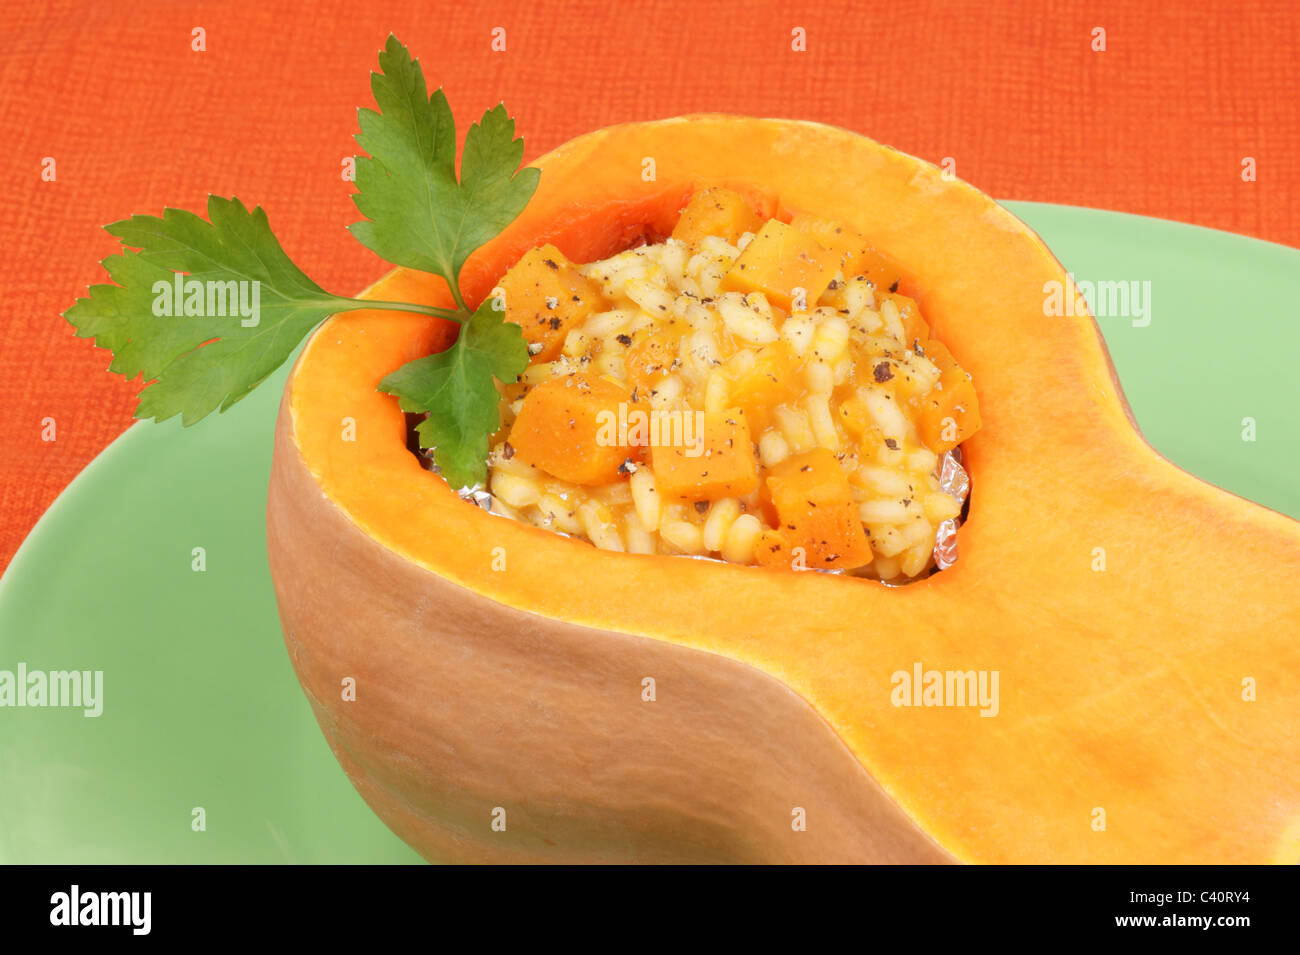 Half pumpkin filled with pumpkin risotto served on a green plate Stock Photo